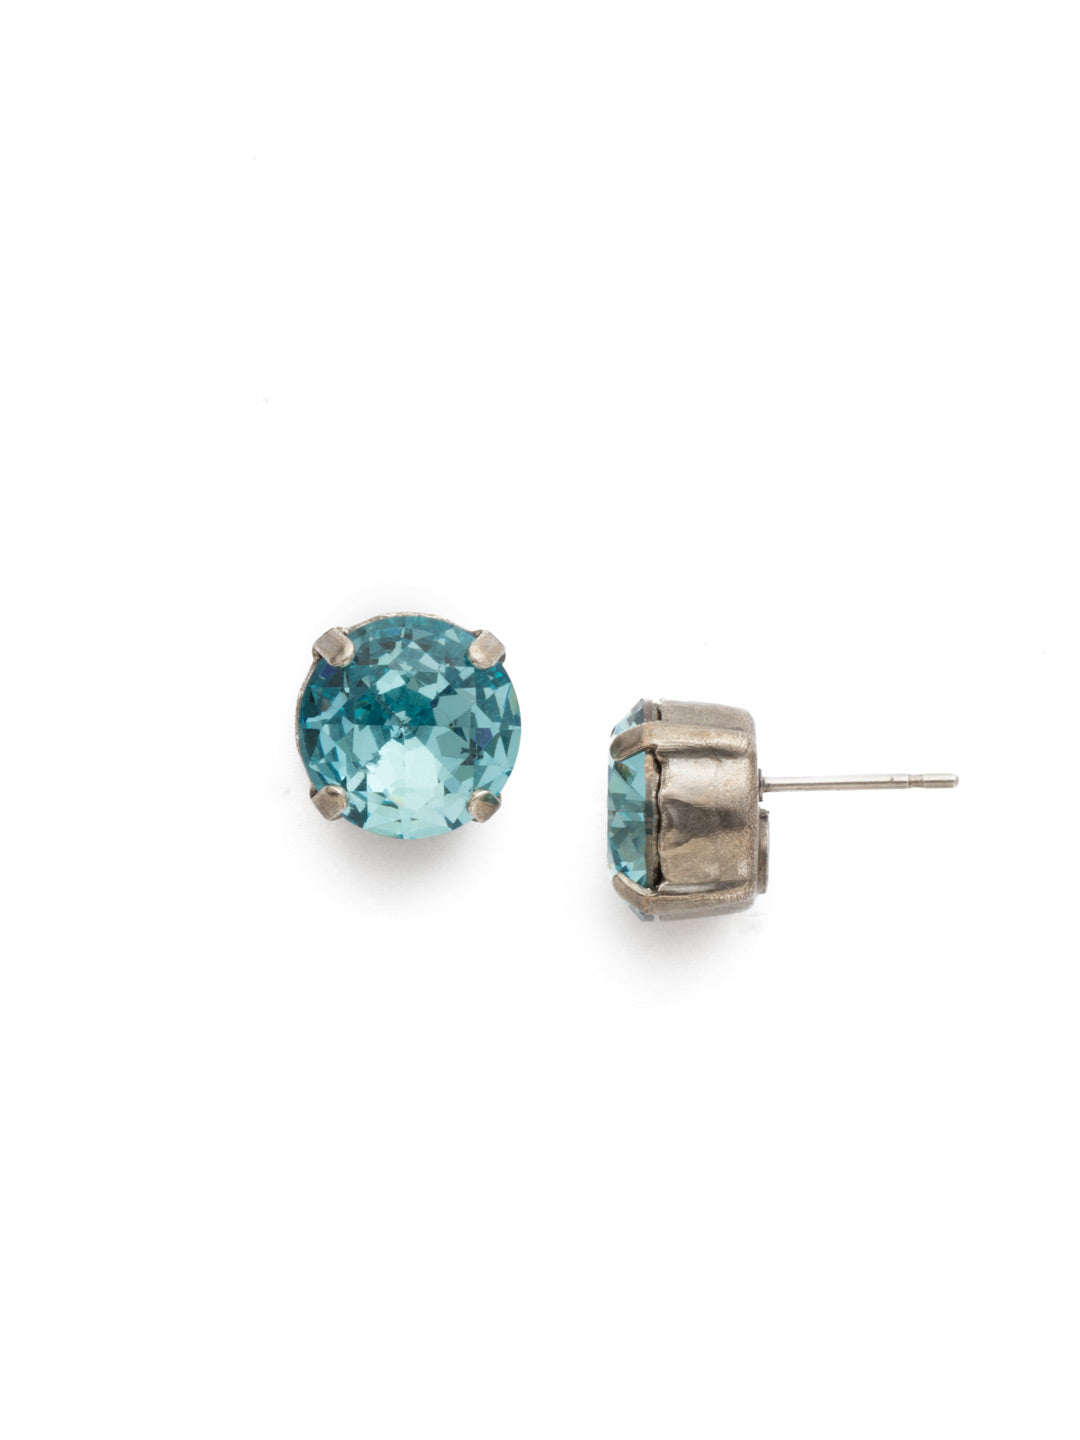 London Stud Earrings - ECM14ASAQU - <p>Everyone needs a great pair of studs. Add some classic sparkle to any occasion with these stud earrings. Need help picking a stud? <a href="https://www.sorrelli.com/blogs/sisterhood/round-stud-earrings-101-a-rundown-of-sizes-styles-and-sparkle">Check out our size guide!</a> From Sorrelli's Aquamarine collection in our Antique Silver-tone finish.</p>